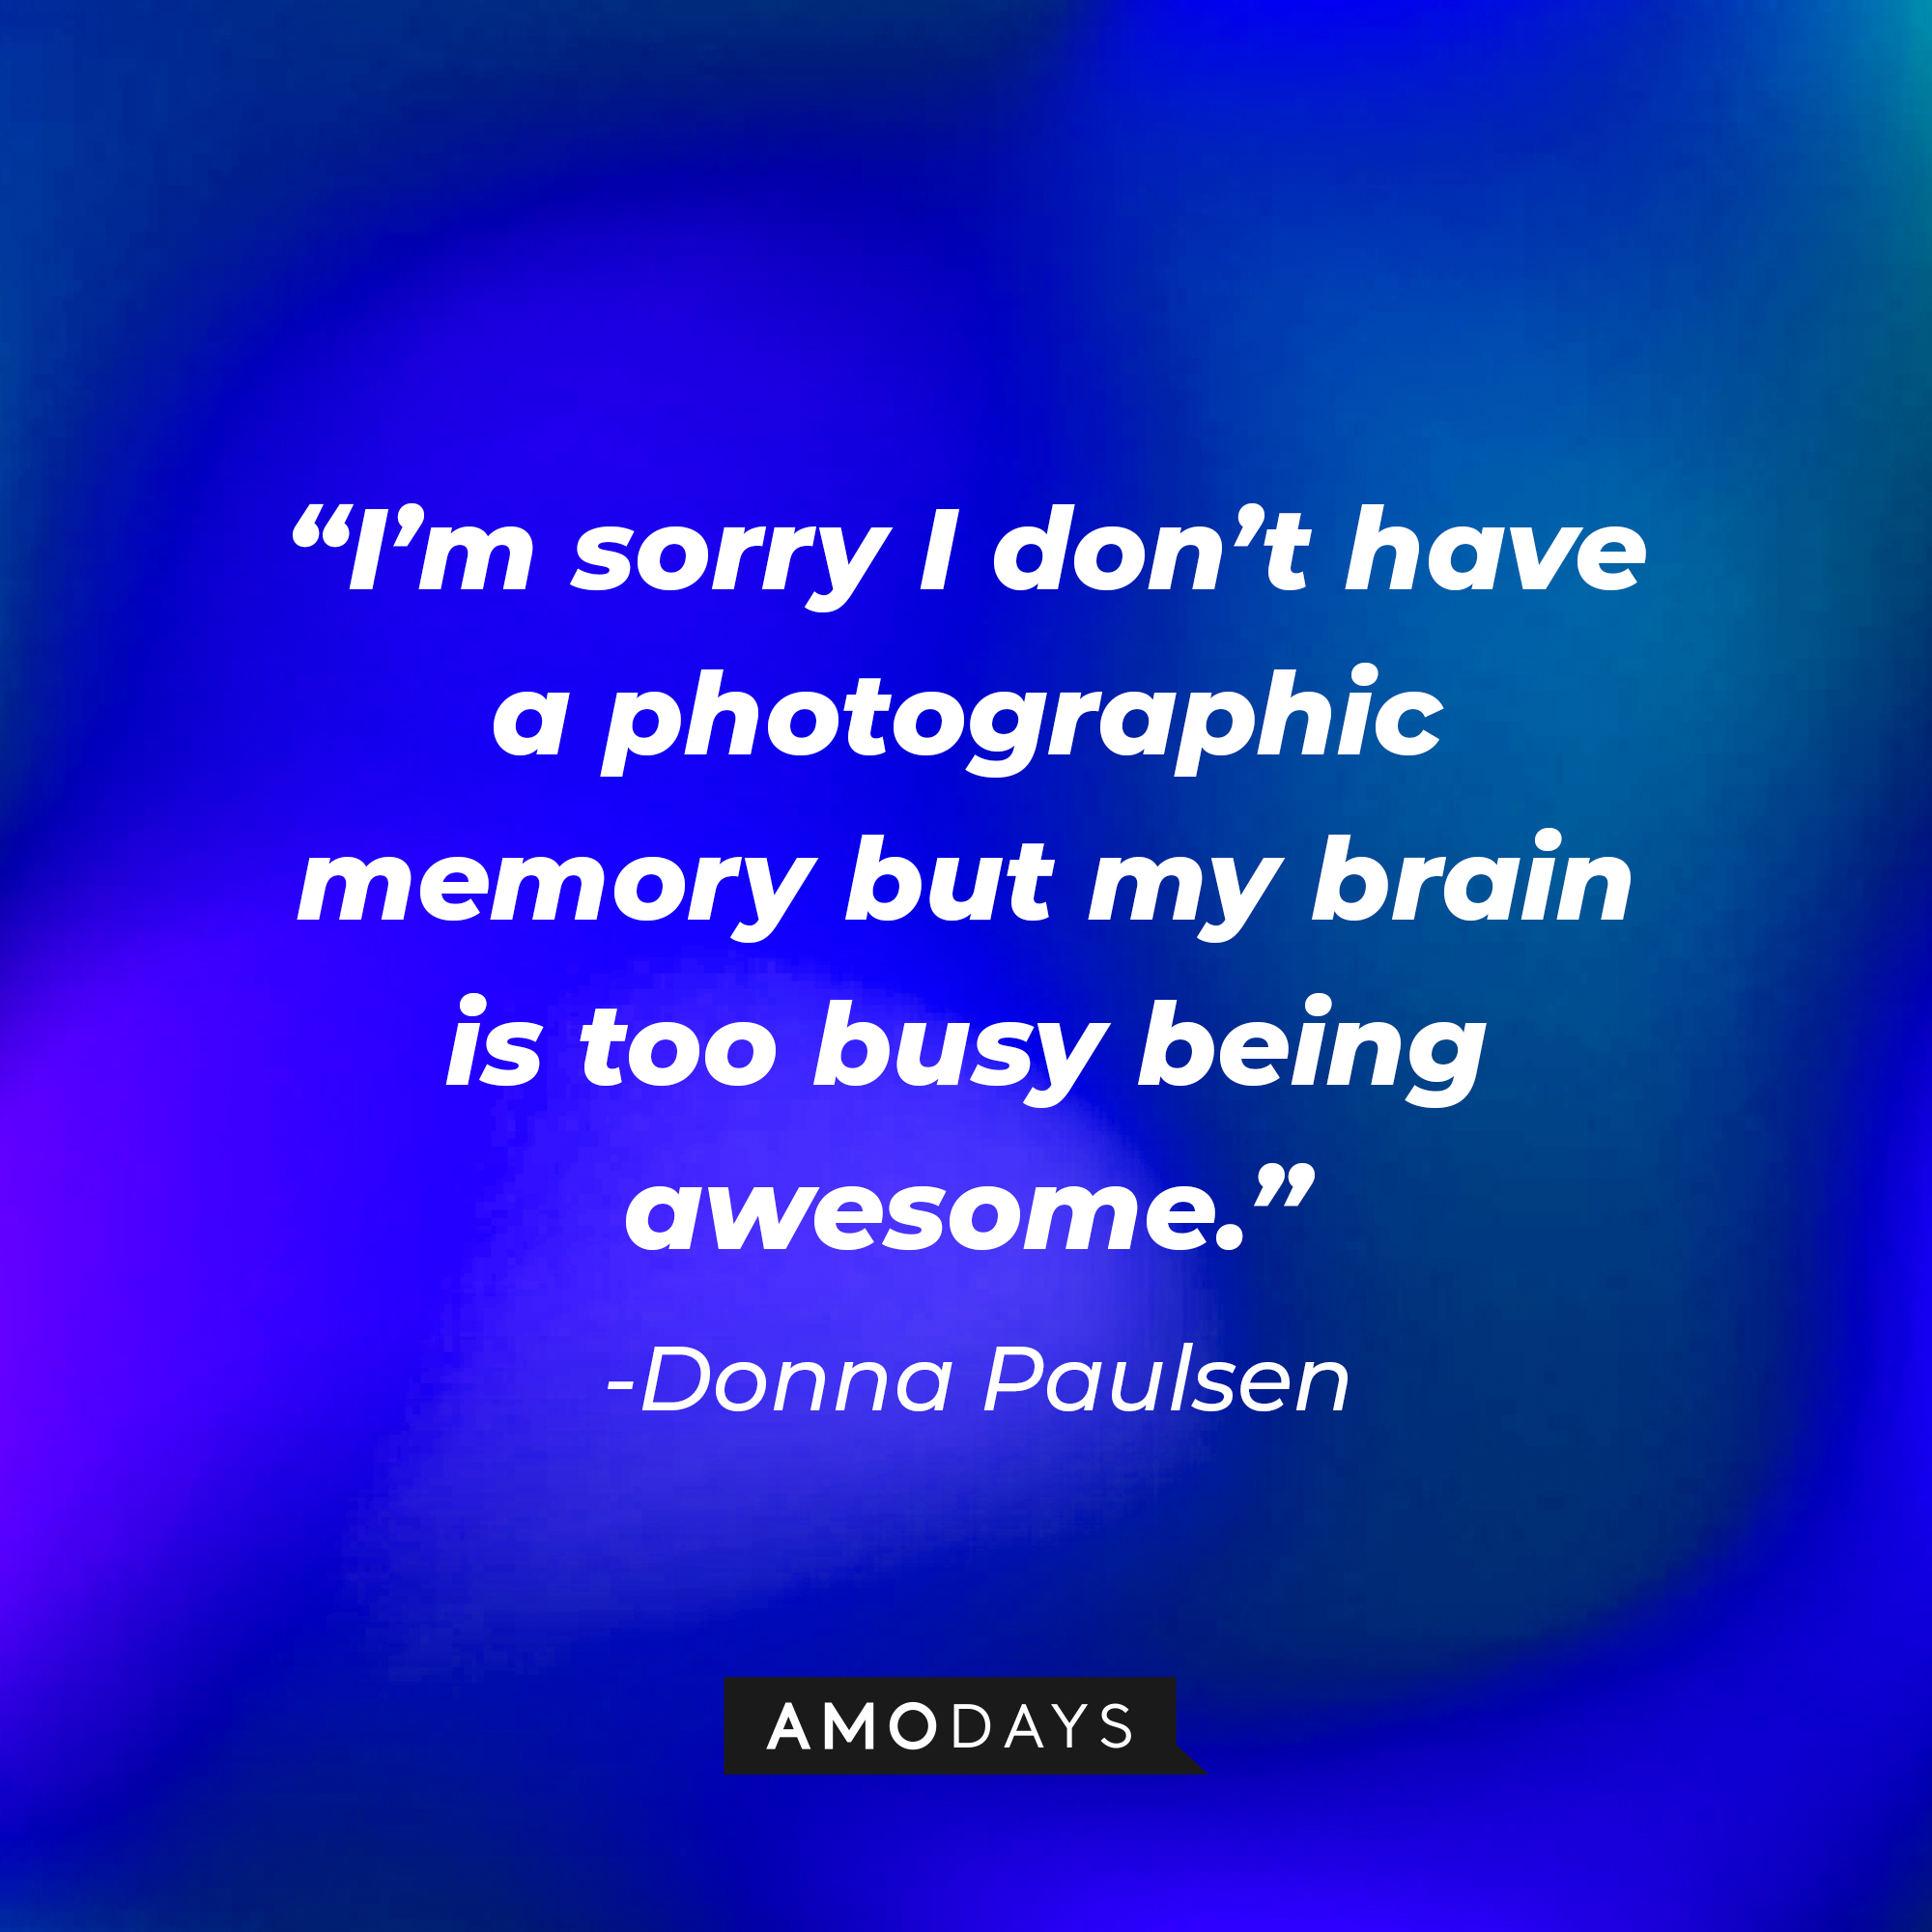 Donna Paulsen's quote from "Suits" : "I'm sorry I don't have a photographic memory but my brain is too busy being awesome." | Source: Amodays